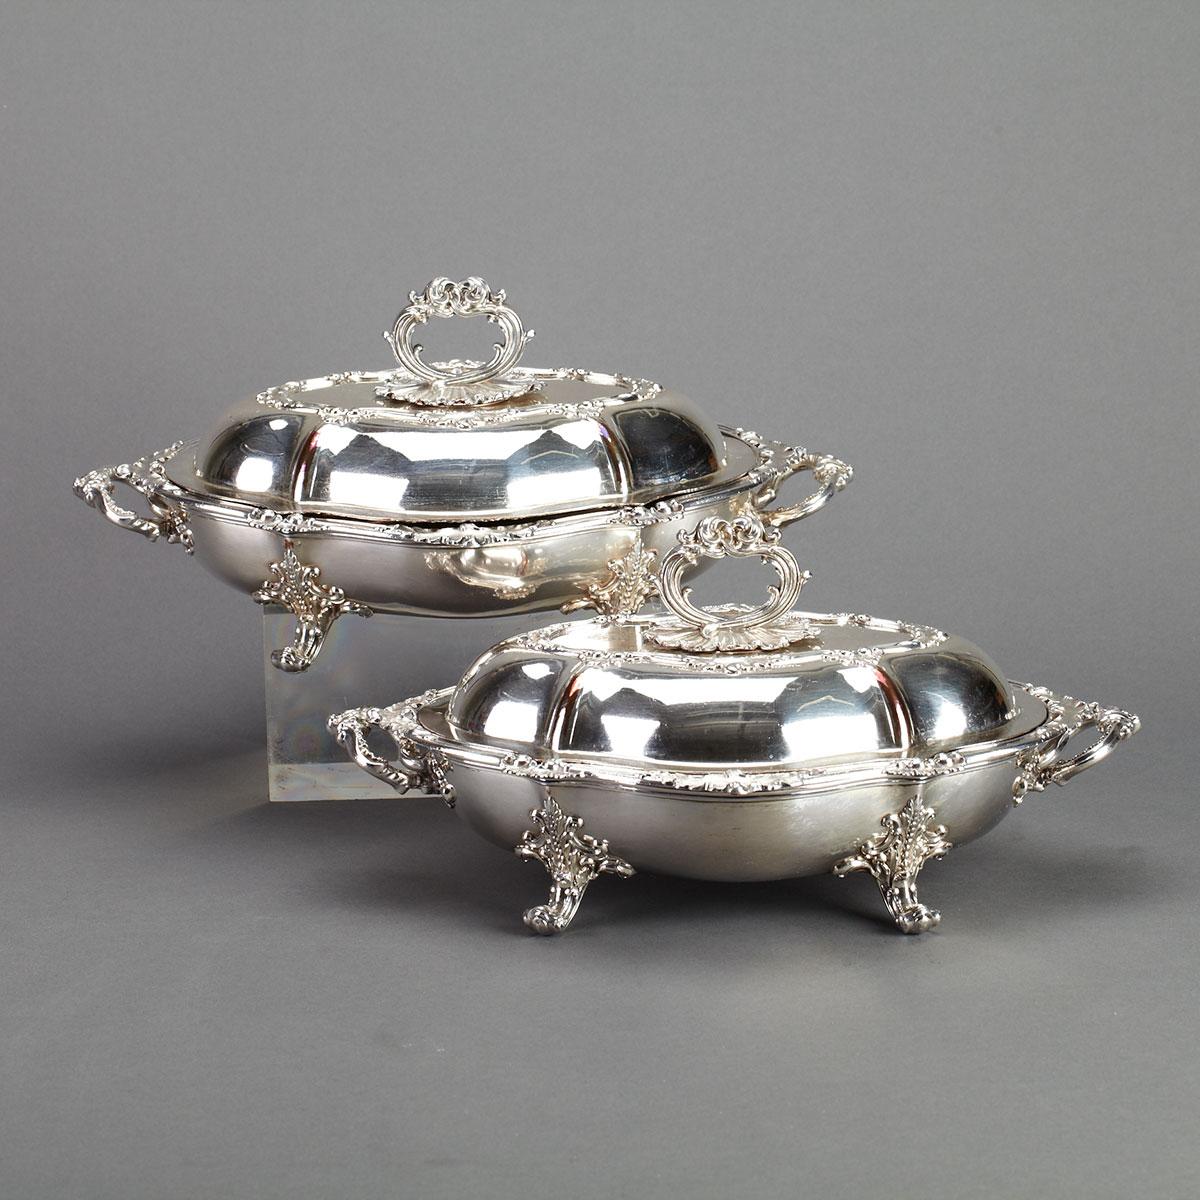 Pair of Old Sheffield Plate Covered Entrée Dishes with Warming Stands, T. & J. Creswick, c.1825